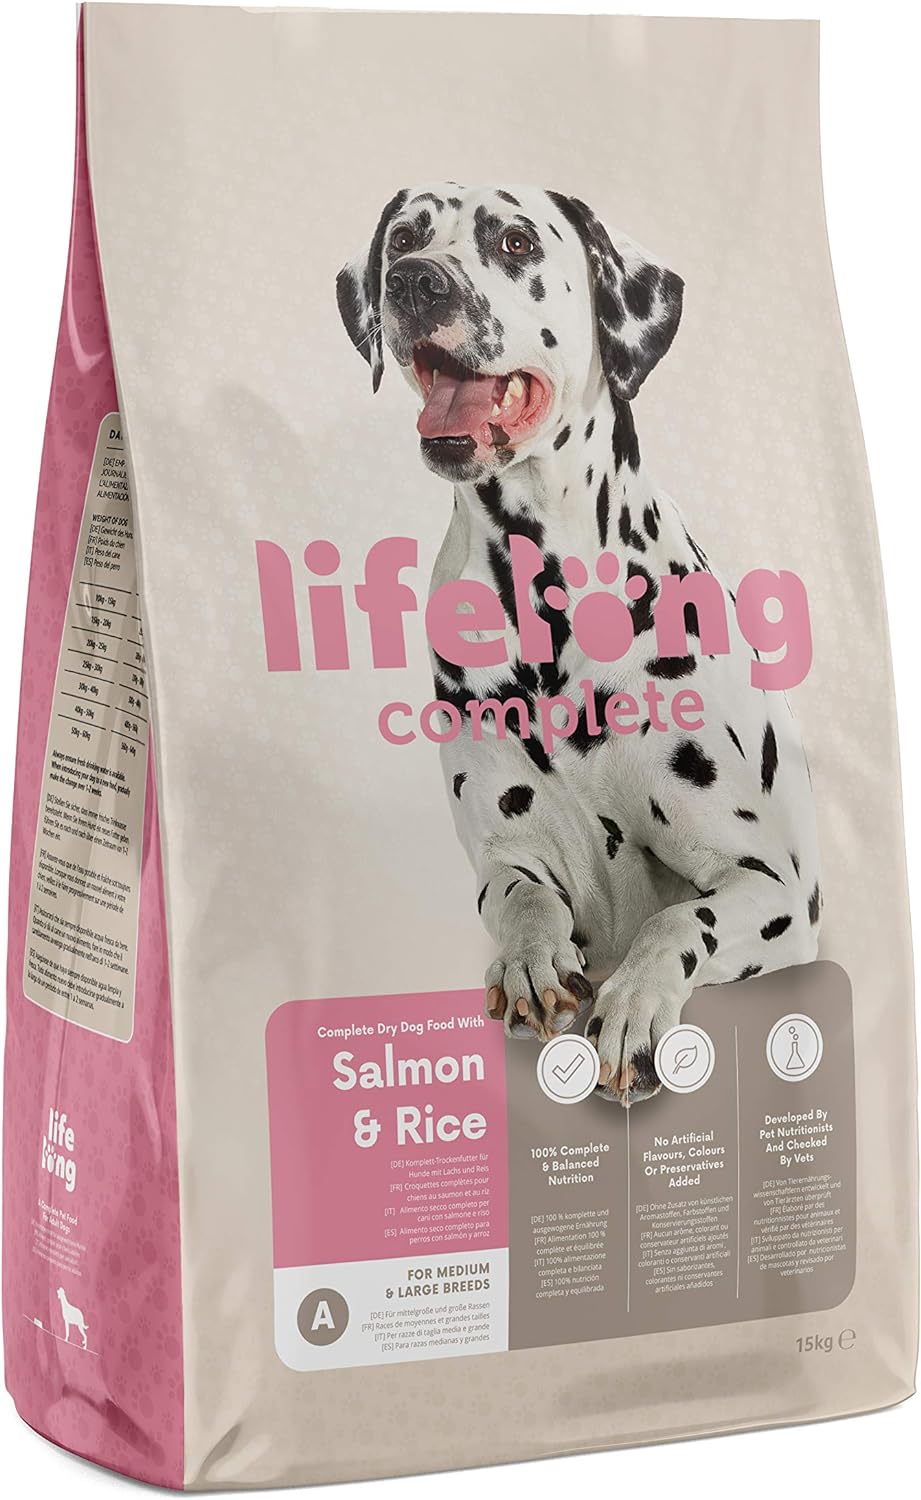 Amazon Brand - Lifelong - Complete Dry Dog Food with Salmon & Rice for Medium and Large Breeds, 1 Pack of 15kg?ESP50062005